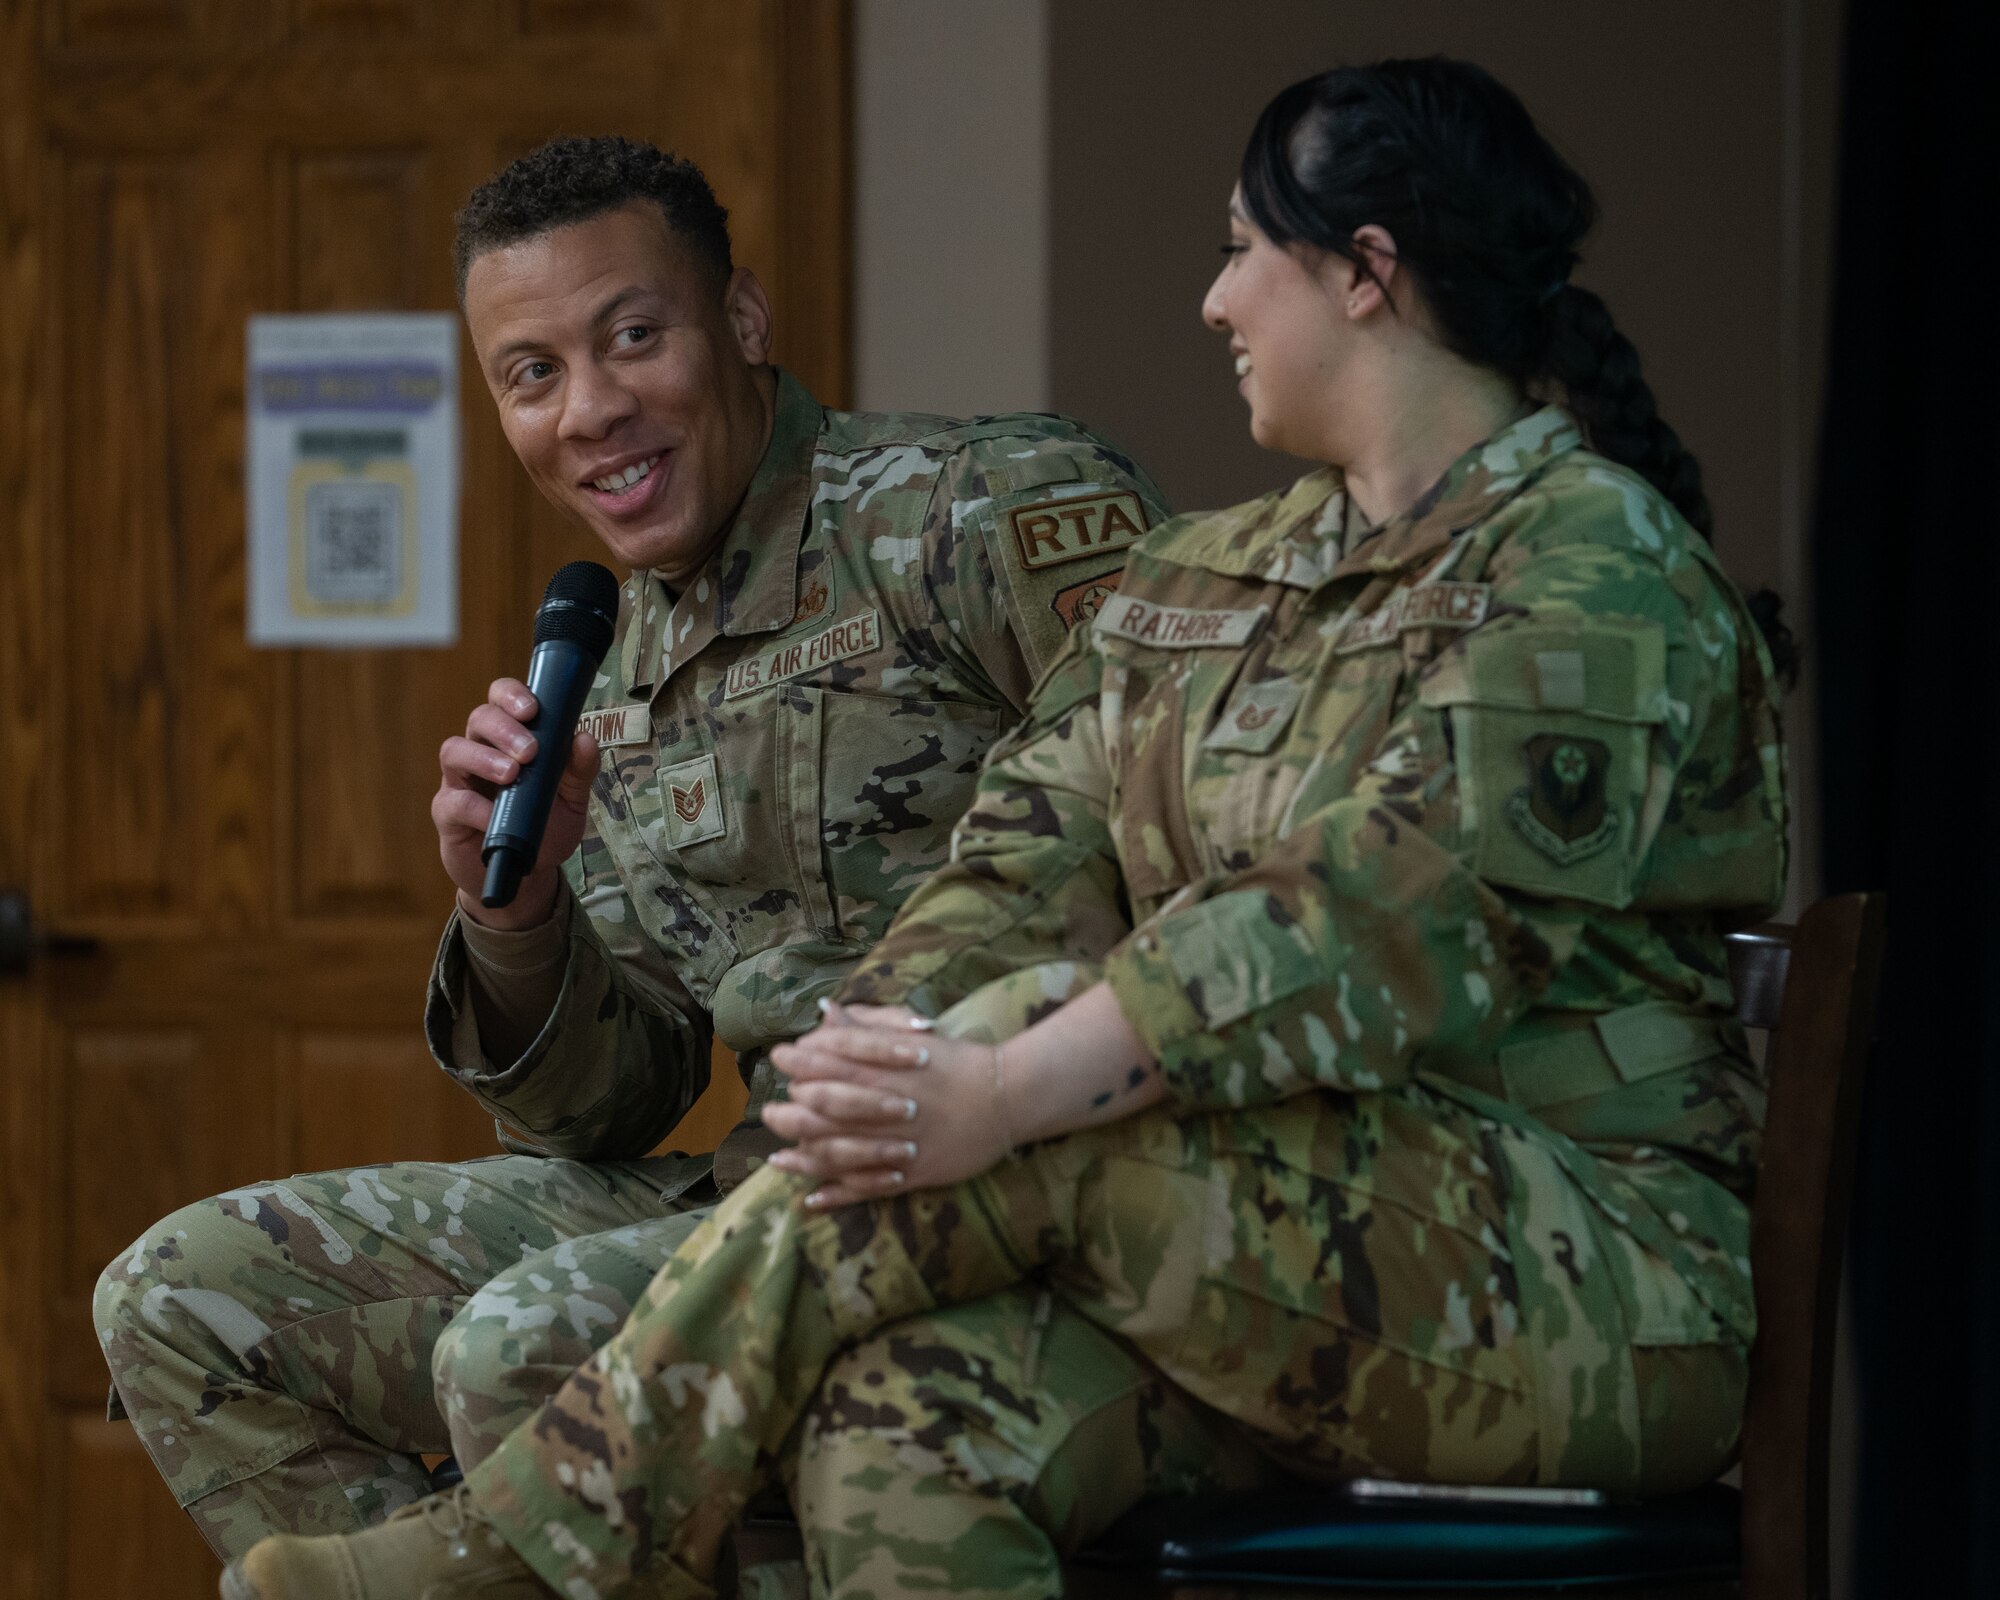 U.S. Air Force Tech. Sgt. Justin Brown, 20th Special Operations Squadron squadron aviation resource management member, and Tech. Sgt. Shivali Rathore, 33rd Special Operations Squadron flight chief, discuss ways Airmen can become mentors at the 2nd Annual Women’s Leadership Symposium, Cannon Air Force Base, N.M., on March 15, 2024. The Women’s Leadership Symposium’s mission is to send a message of professional development, inclusivity and commitment aiming to inspire and empower everyone at Cannon AFB. (U.S. Air Force Photo by Senior Airman Mateo Parra)